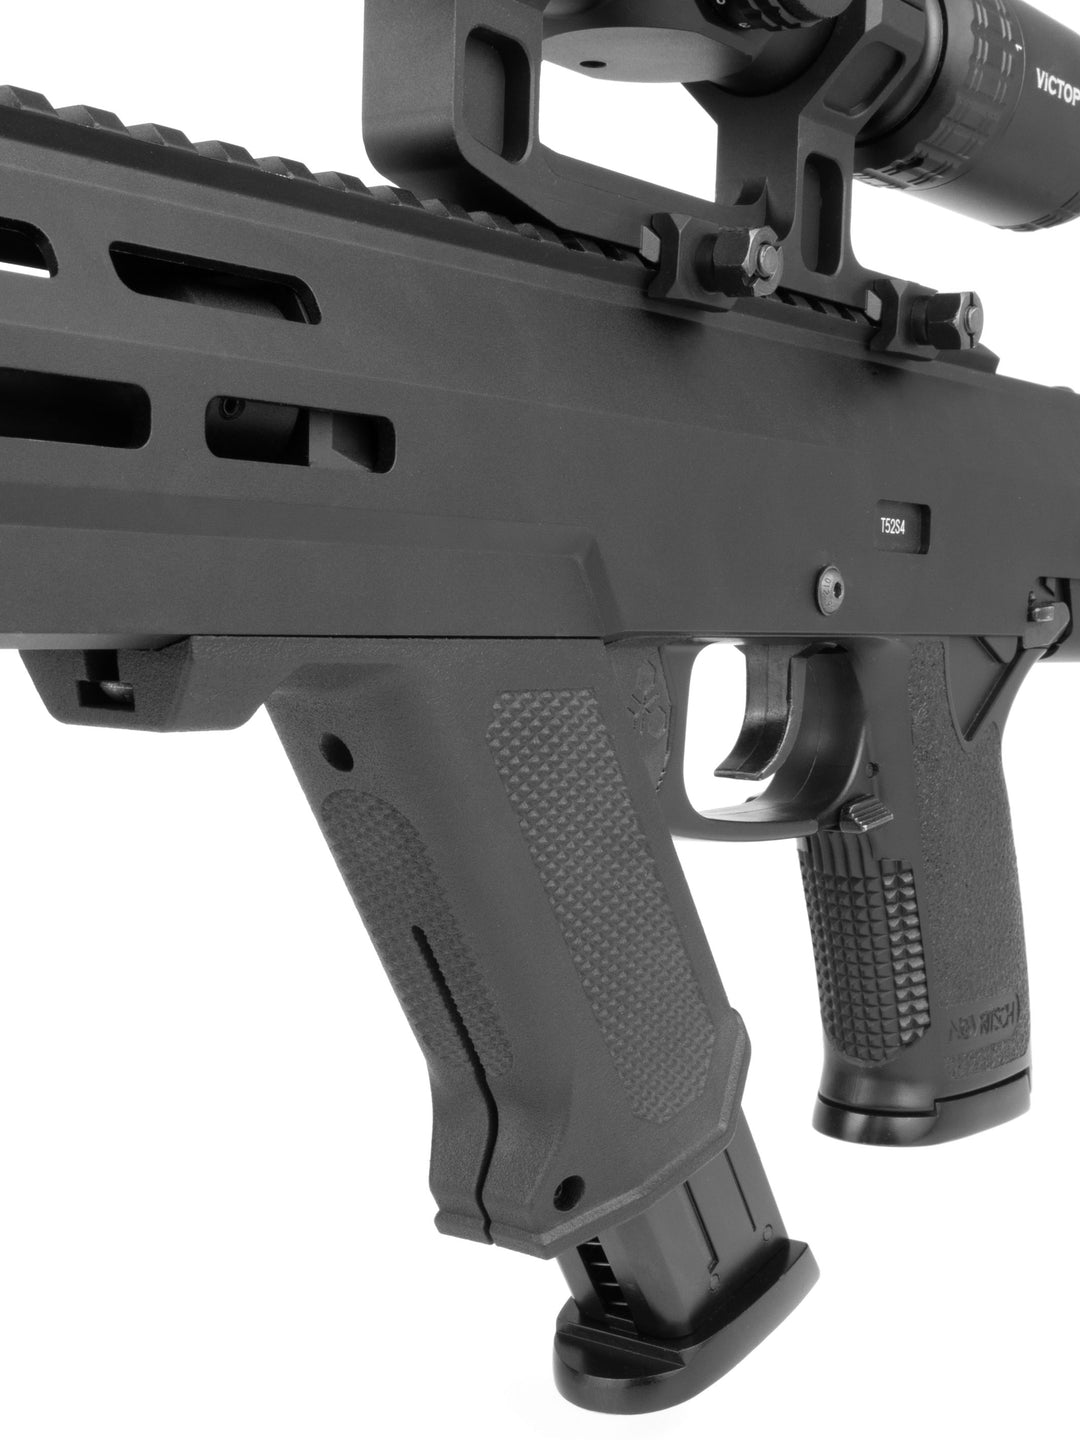 close-up of angled spare mag grip  installed on SSX303 airsoft replica